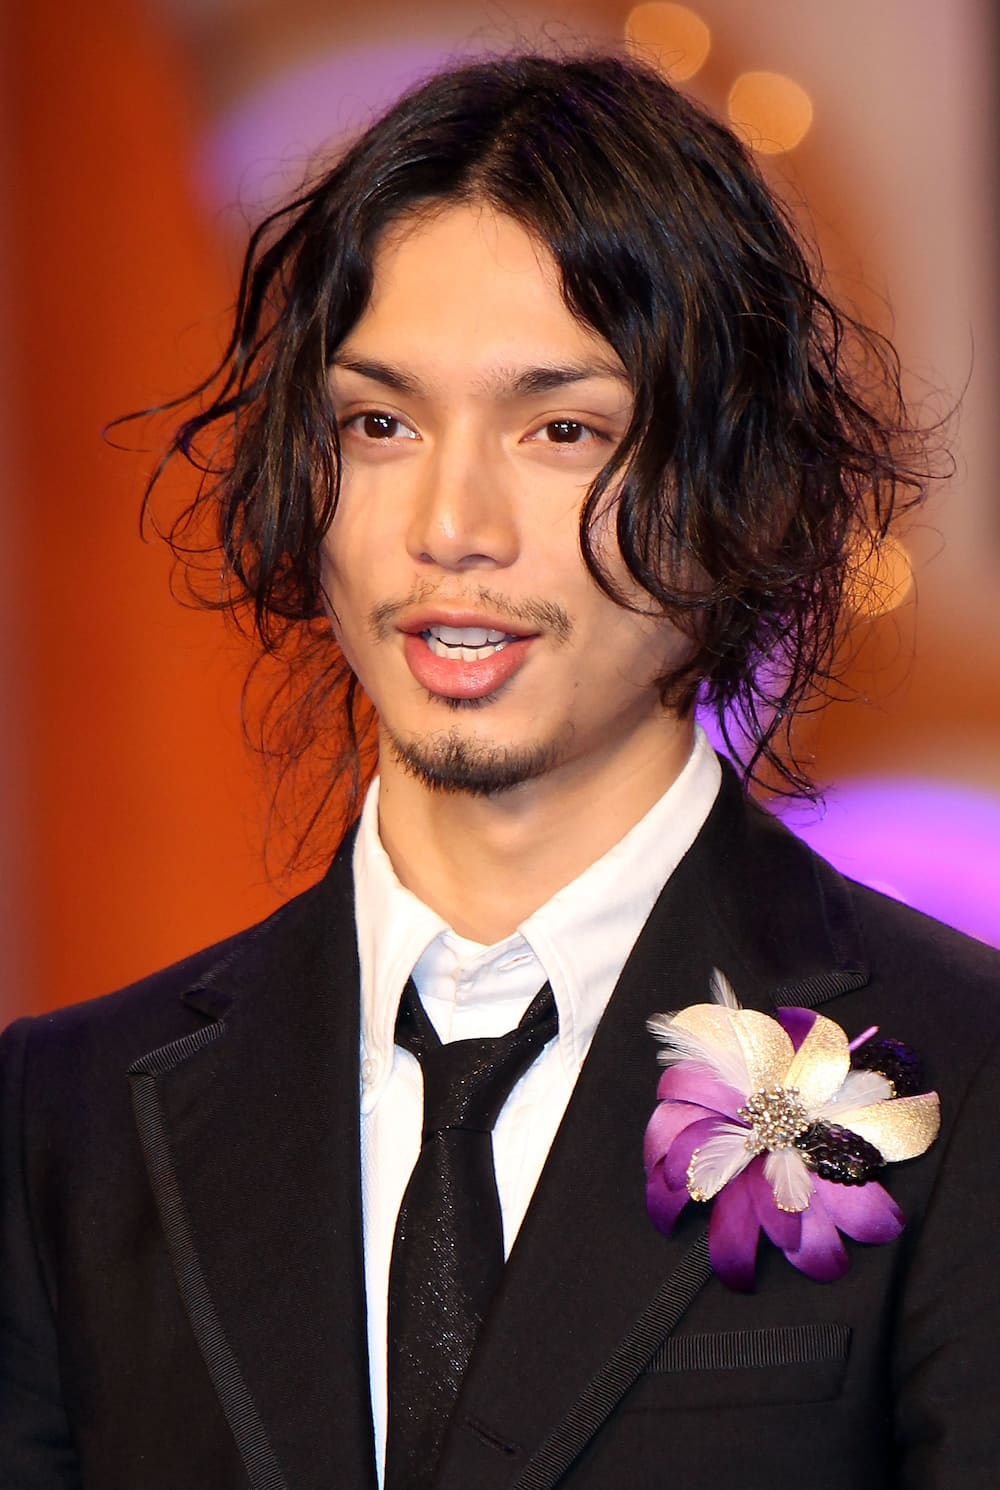 Who is the most popular actor in Japan?